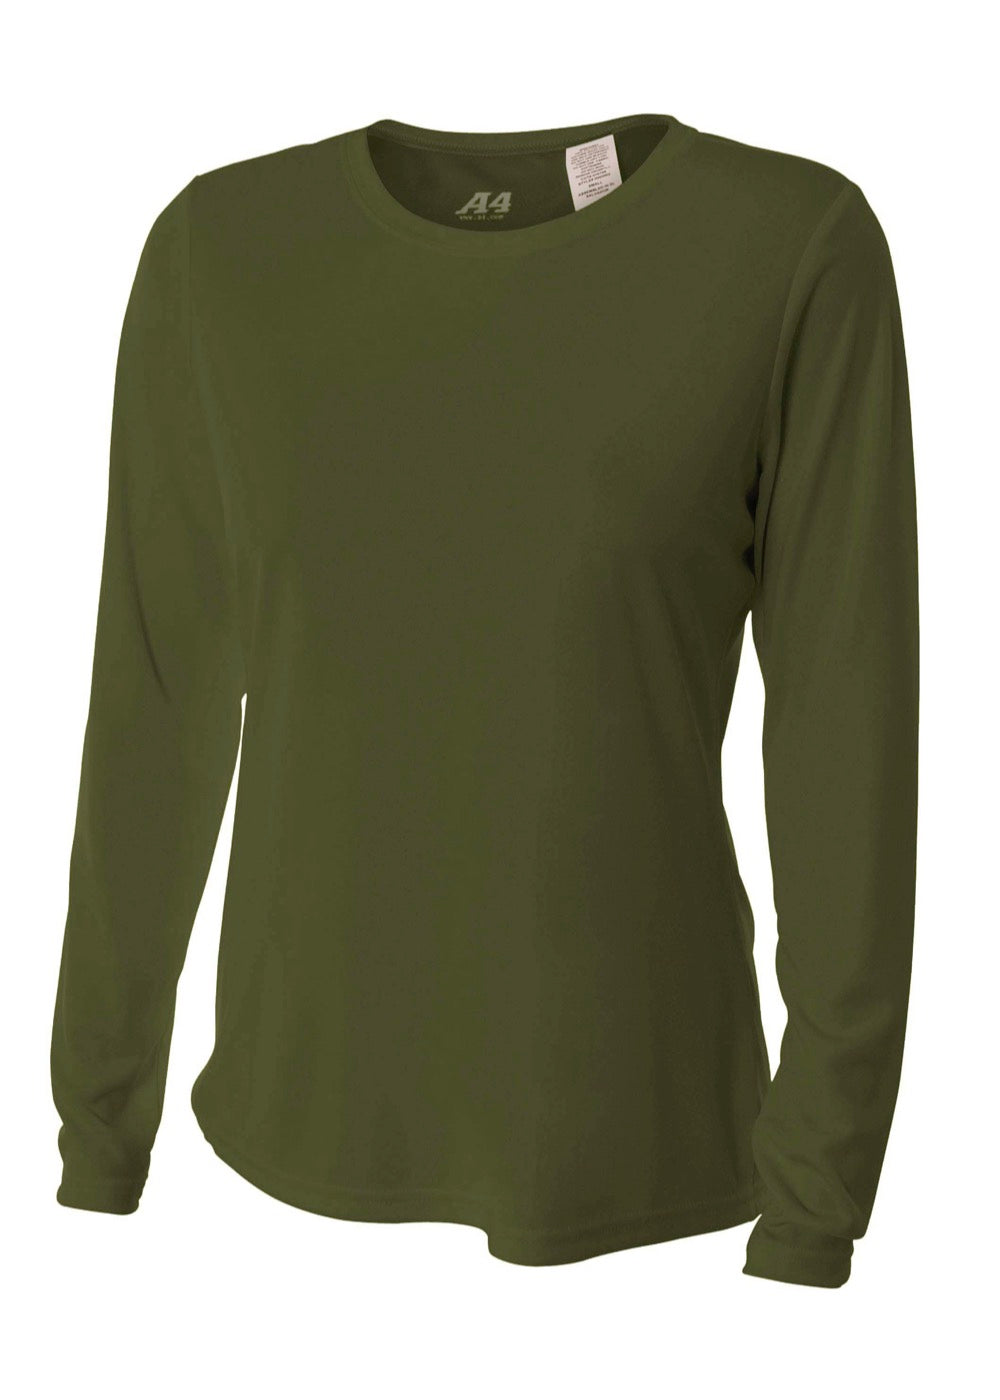 Military-green A4 Long Sleeve Cooling Performance Crew